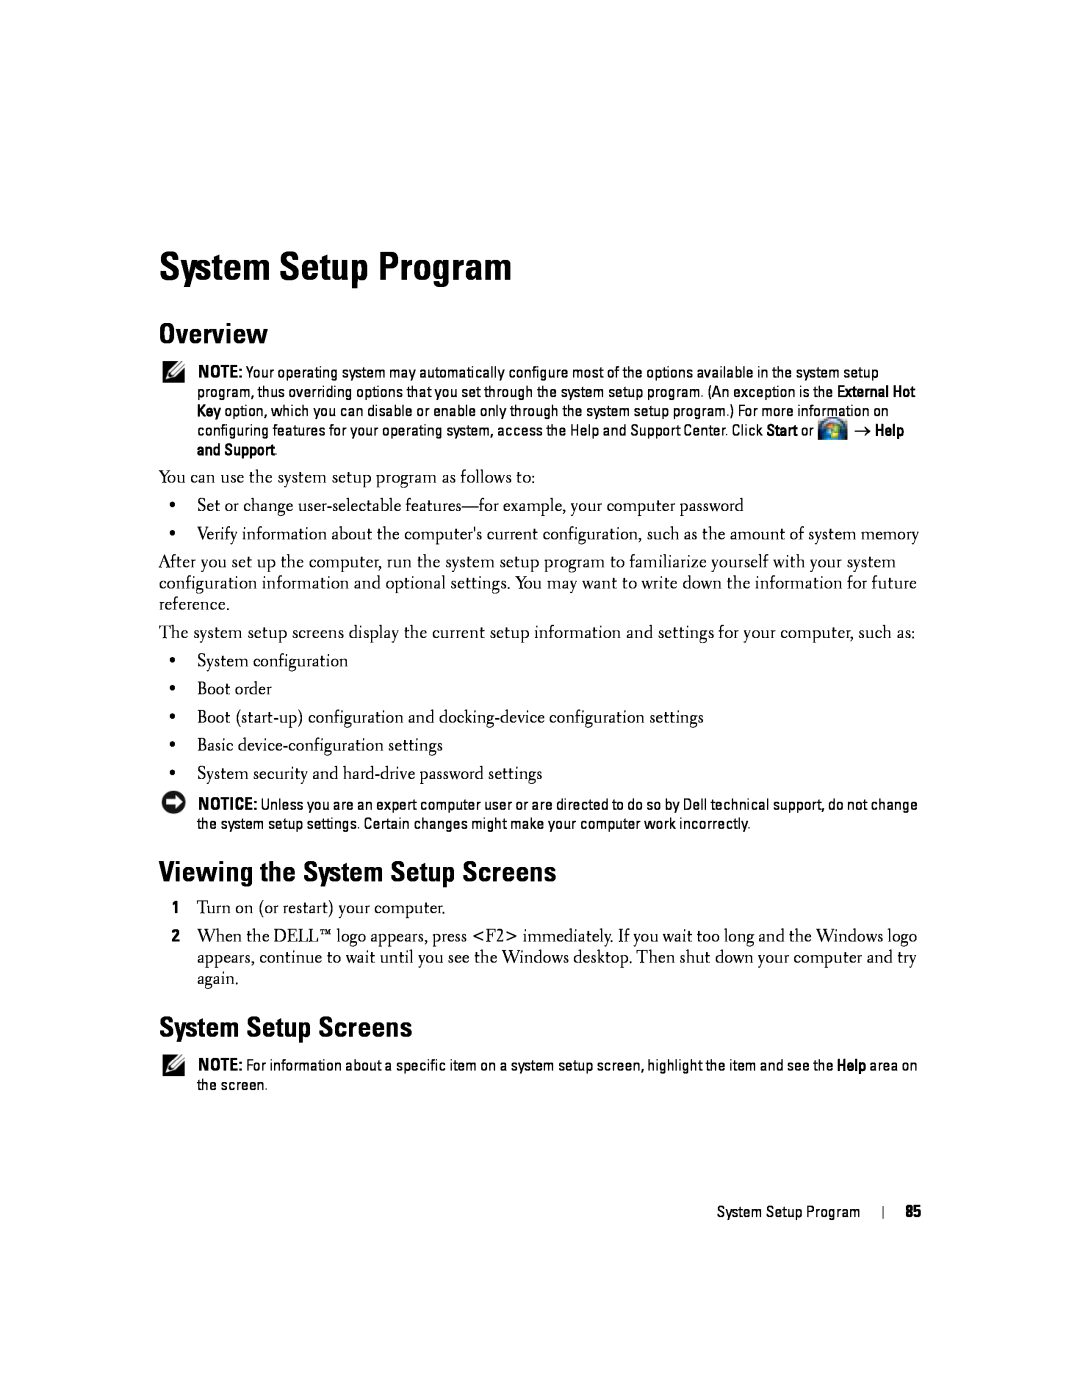 Dell D830, PP04X manual System Setup Program, Overview, Viewing the System Setup Screens 